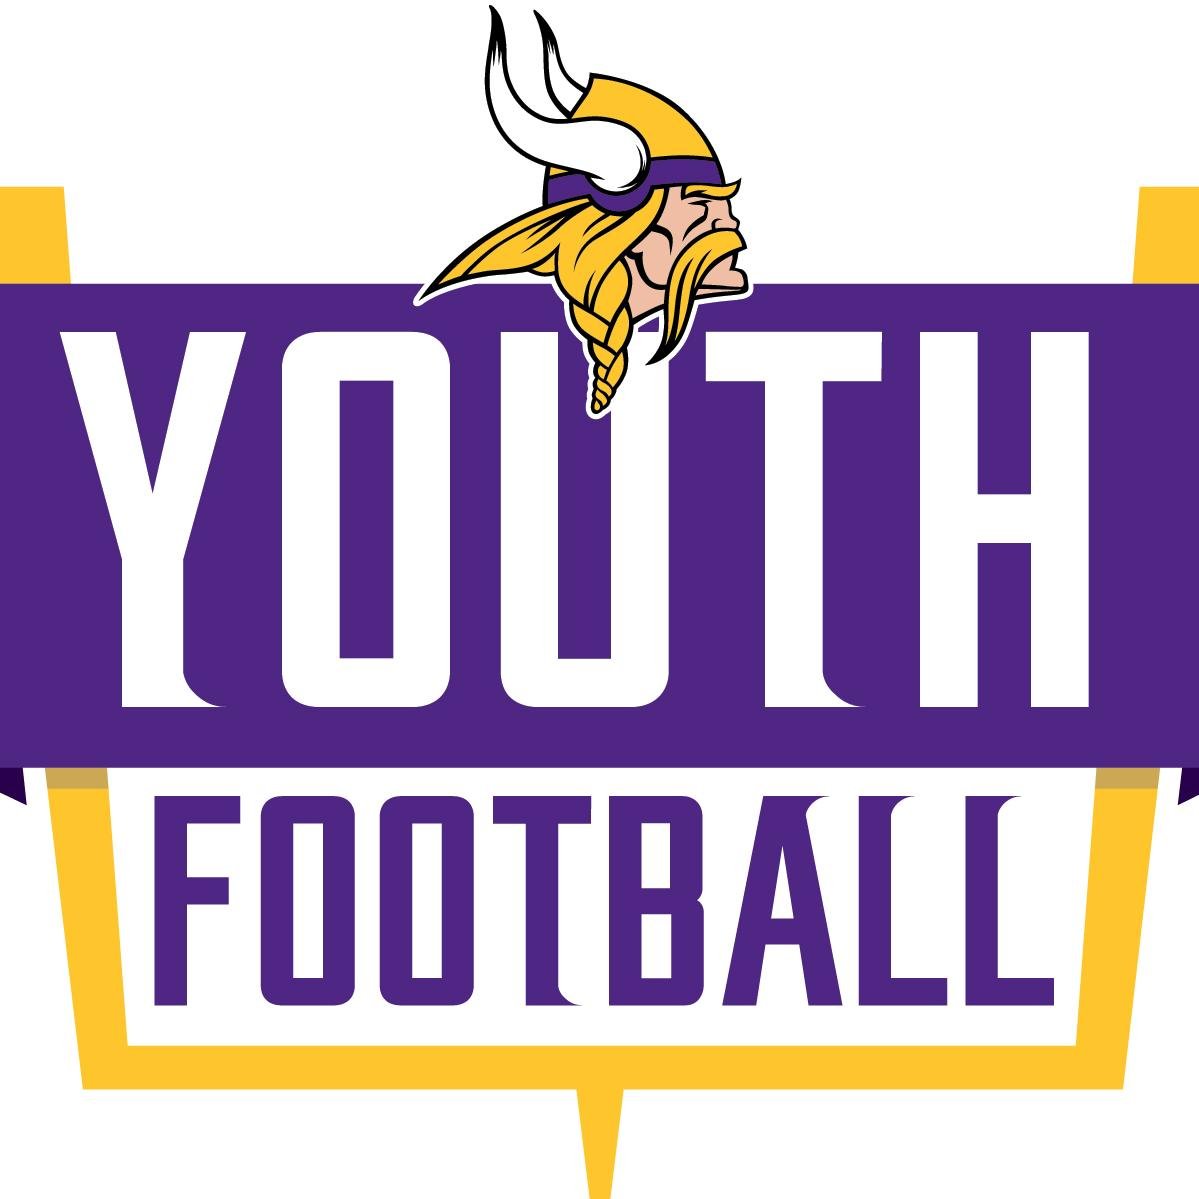 Official Twitter Account of Minnesota Vikings Youth Football. MISSION: To increase awareness surrounding player health and safety in the great game of football.